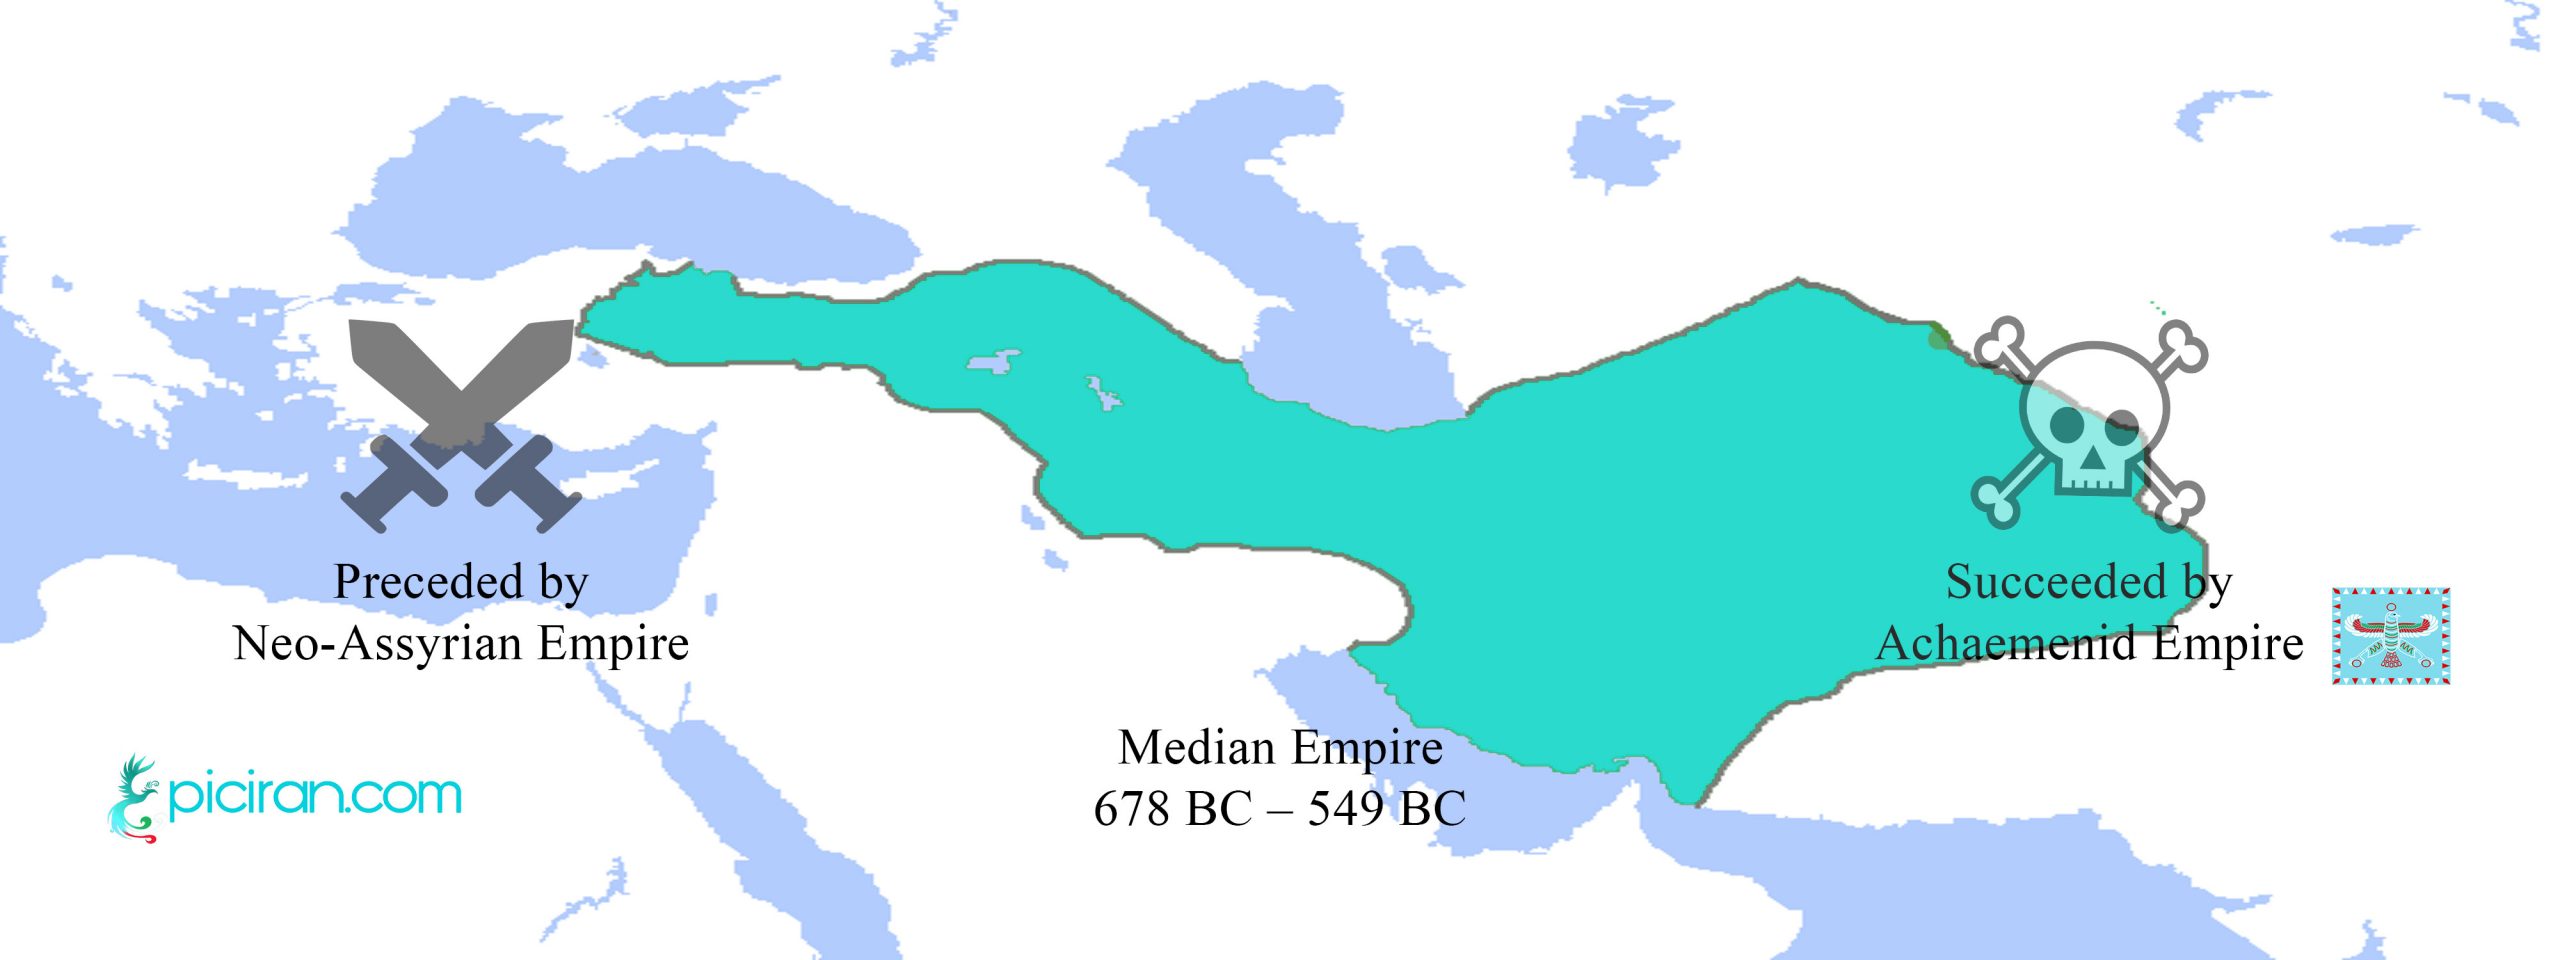 Median Empire – Powerful empire in the Iranian plateau